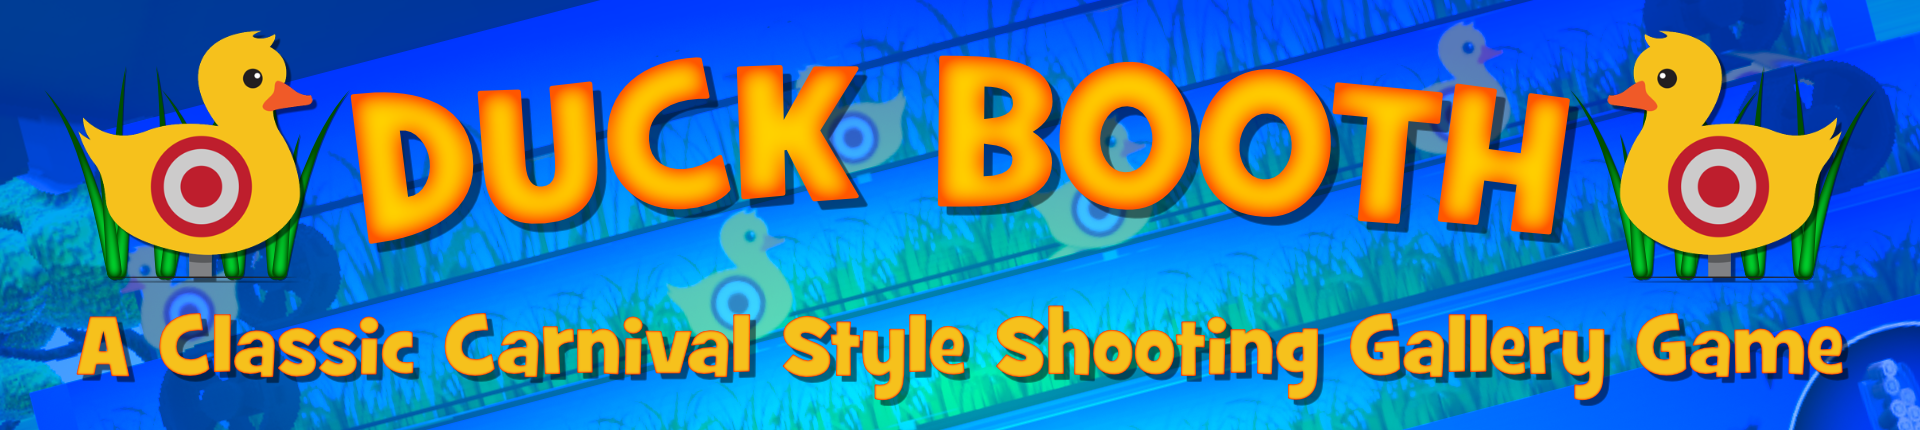 Duck Booth - A Classic Carnival Style Shooting Gallery Game